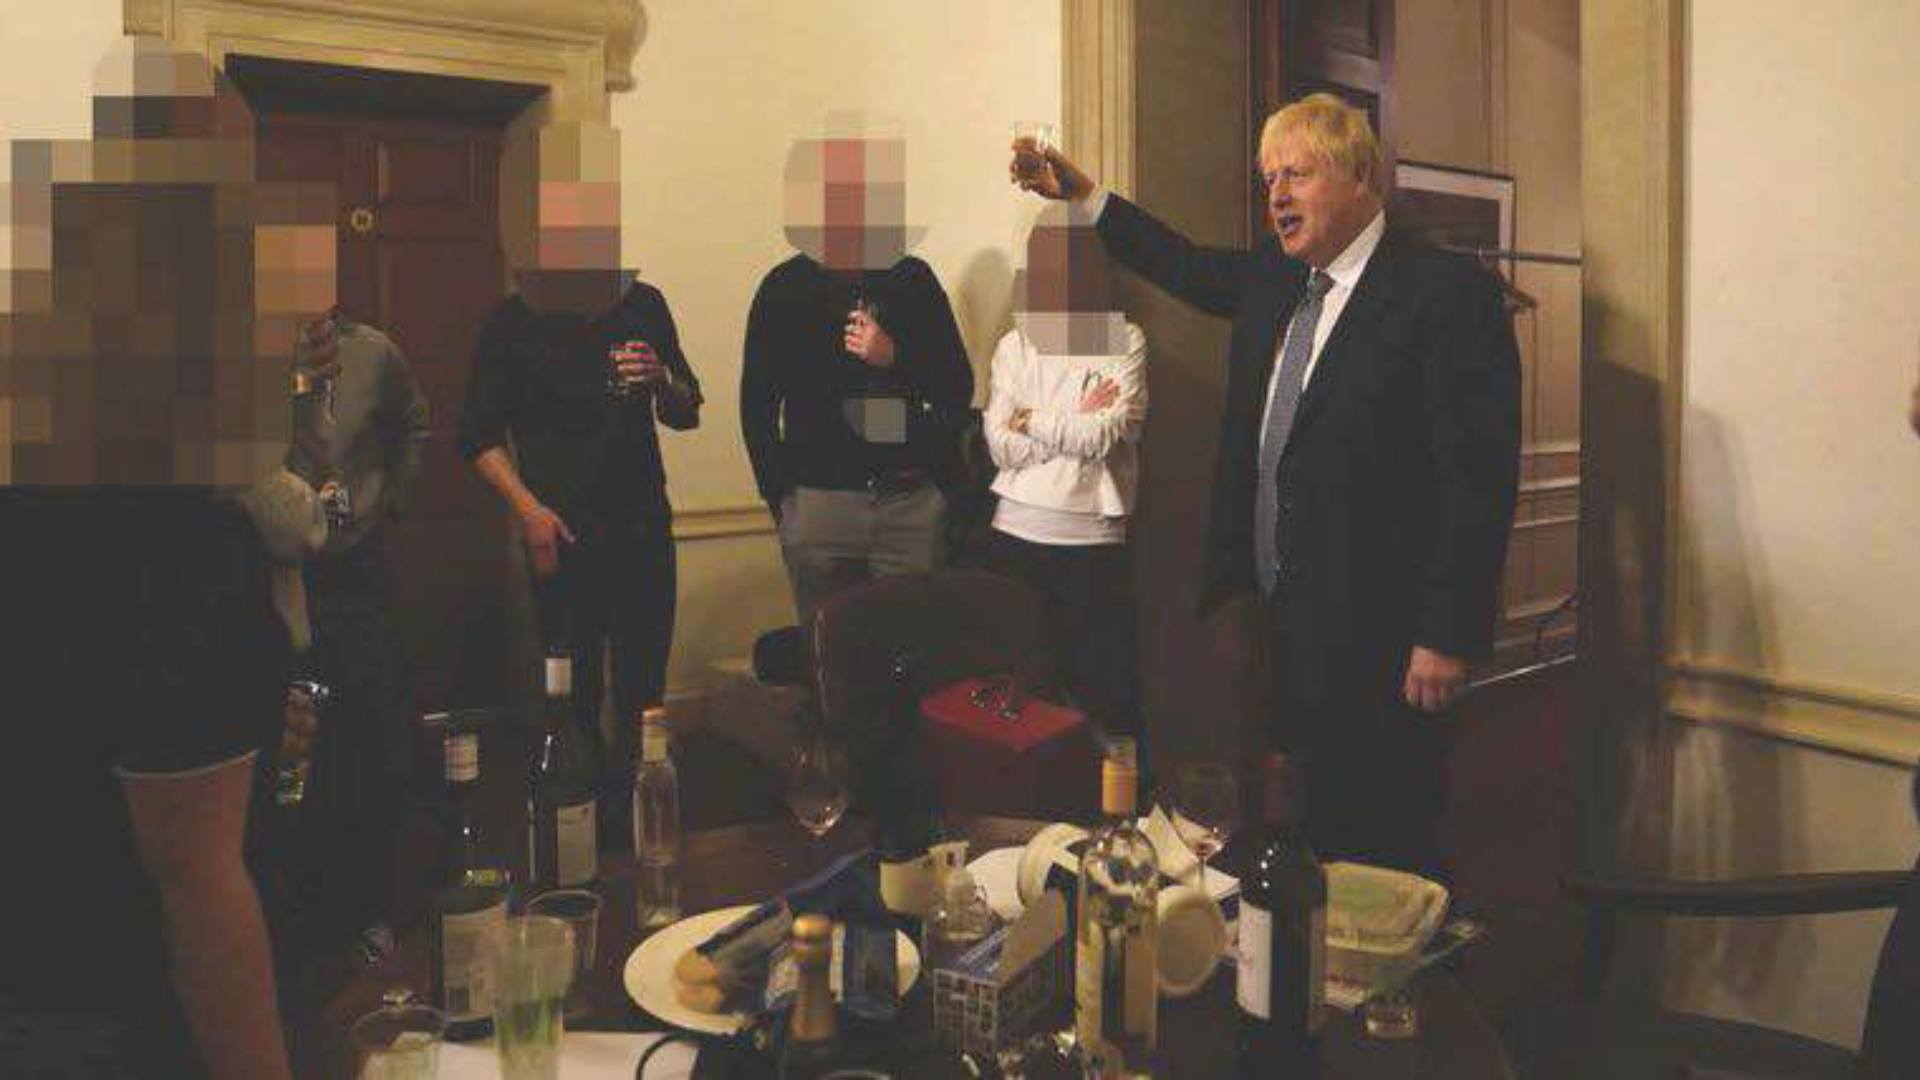 The Privileges Committee described Boris Johnson's behaviour during the partygate scandal as 'reckless'.